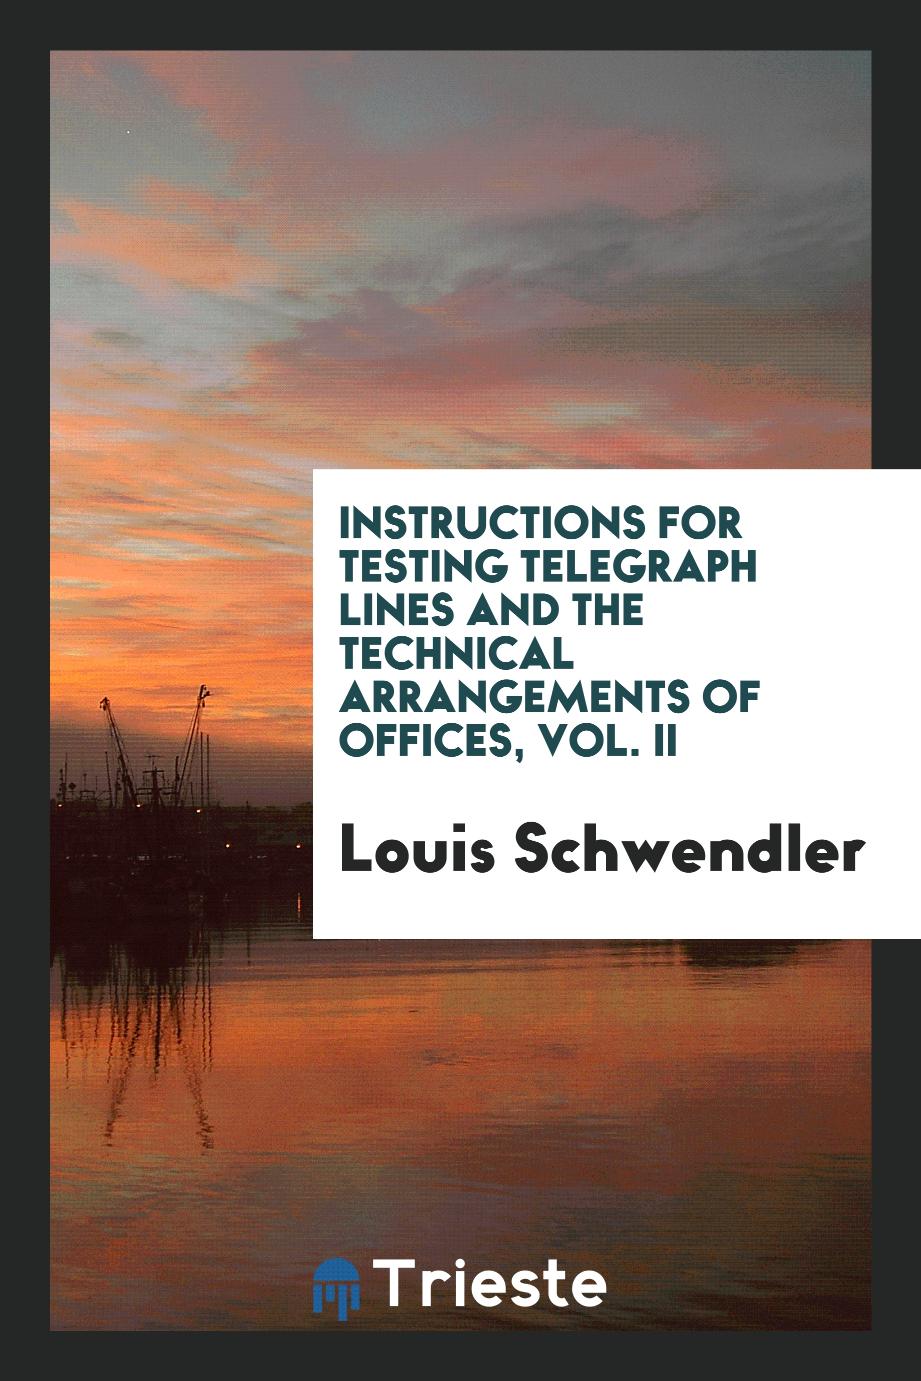 Instructions for testing telegraph lines and the technical arrangements of offices, Vol. II